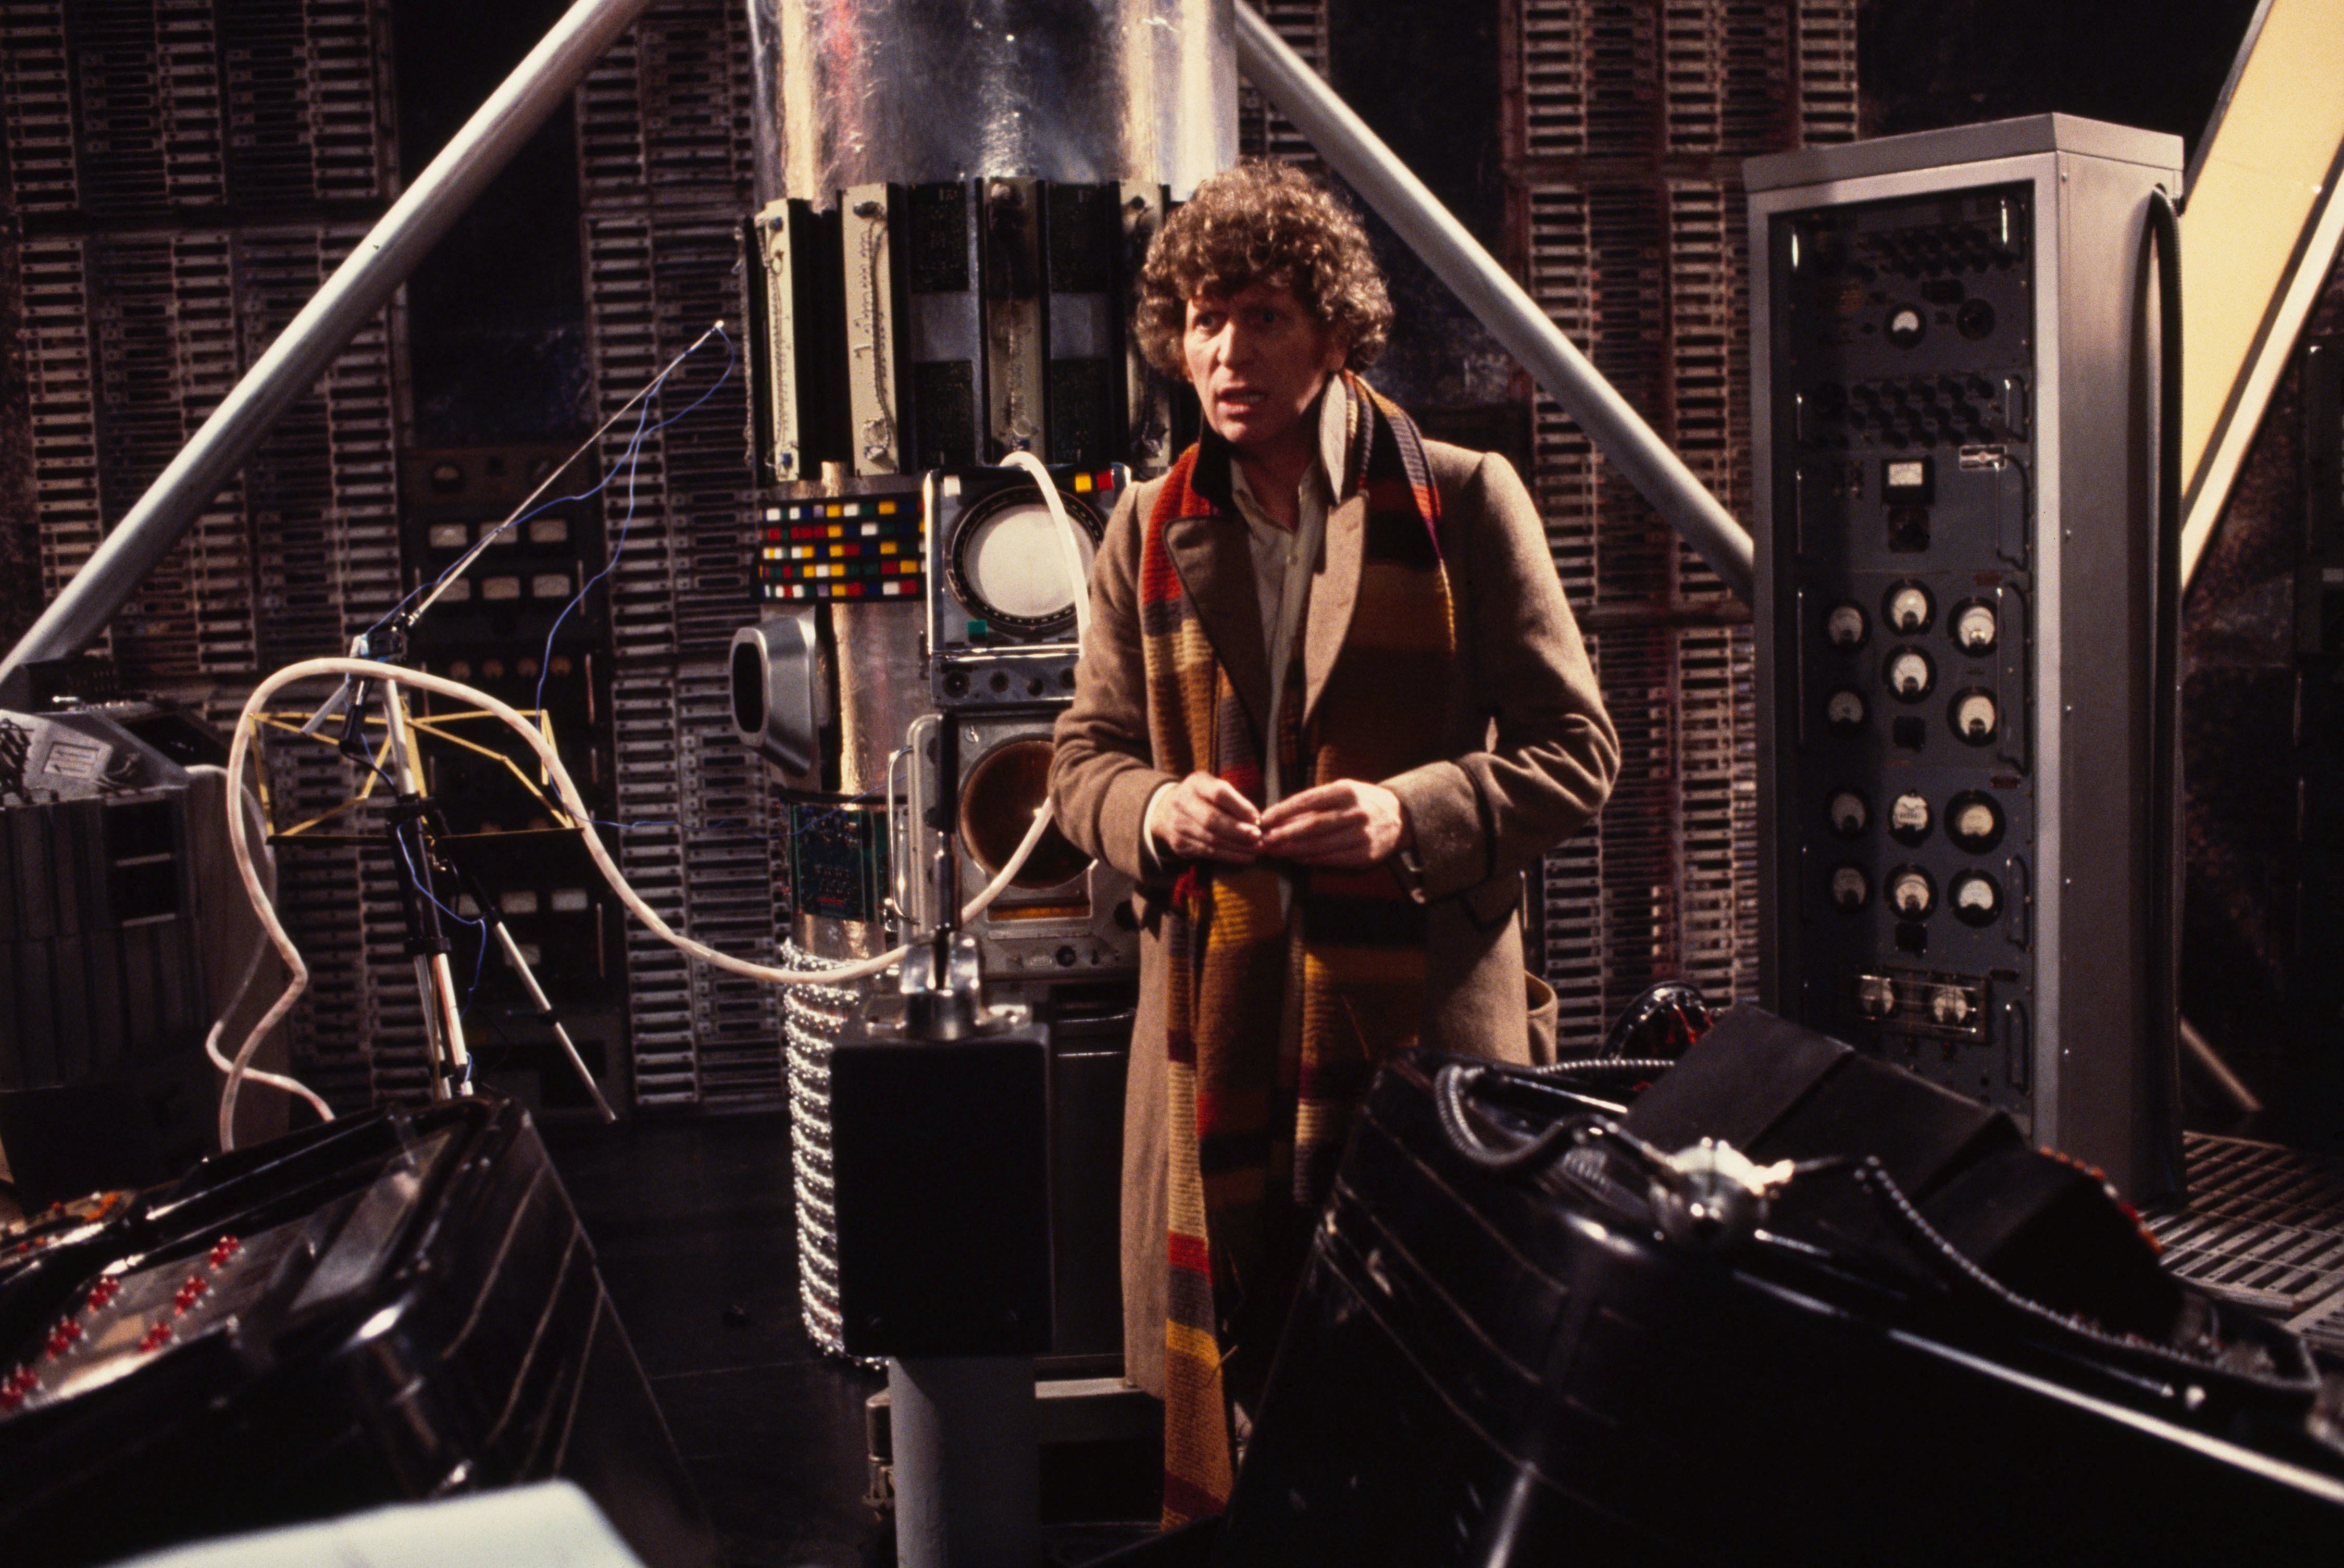 Doctor Who's 60 best episodes of all time, ranked